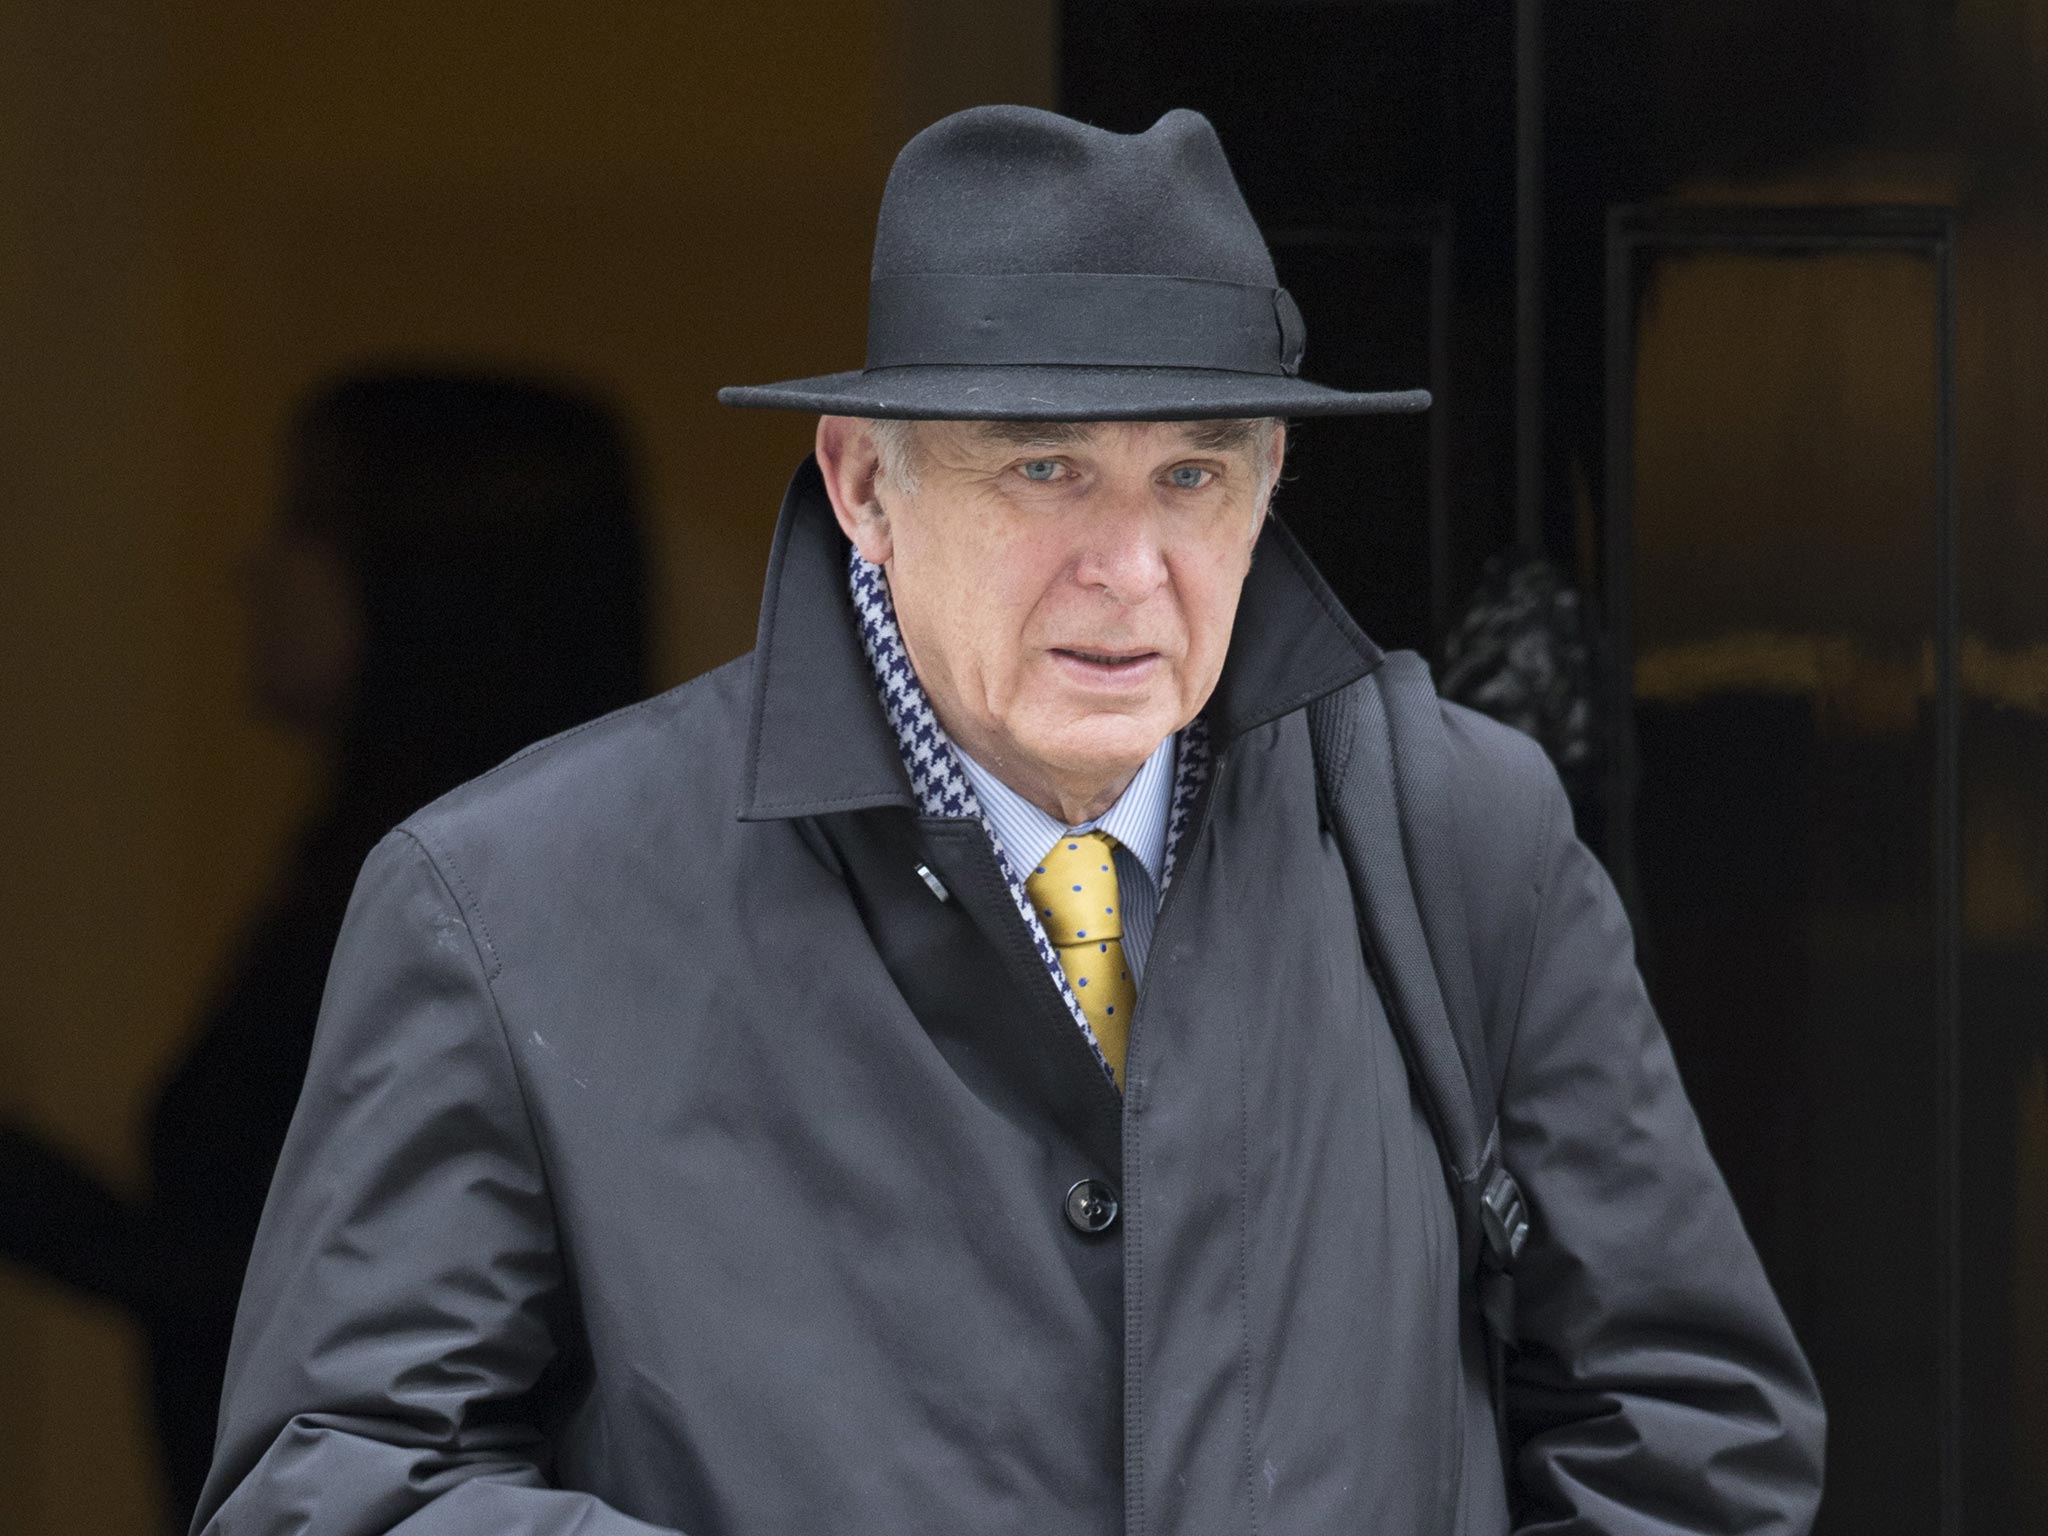 Business Secretary Vince Cable will have to explain why Lazard was used so often